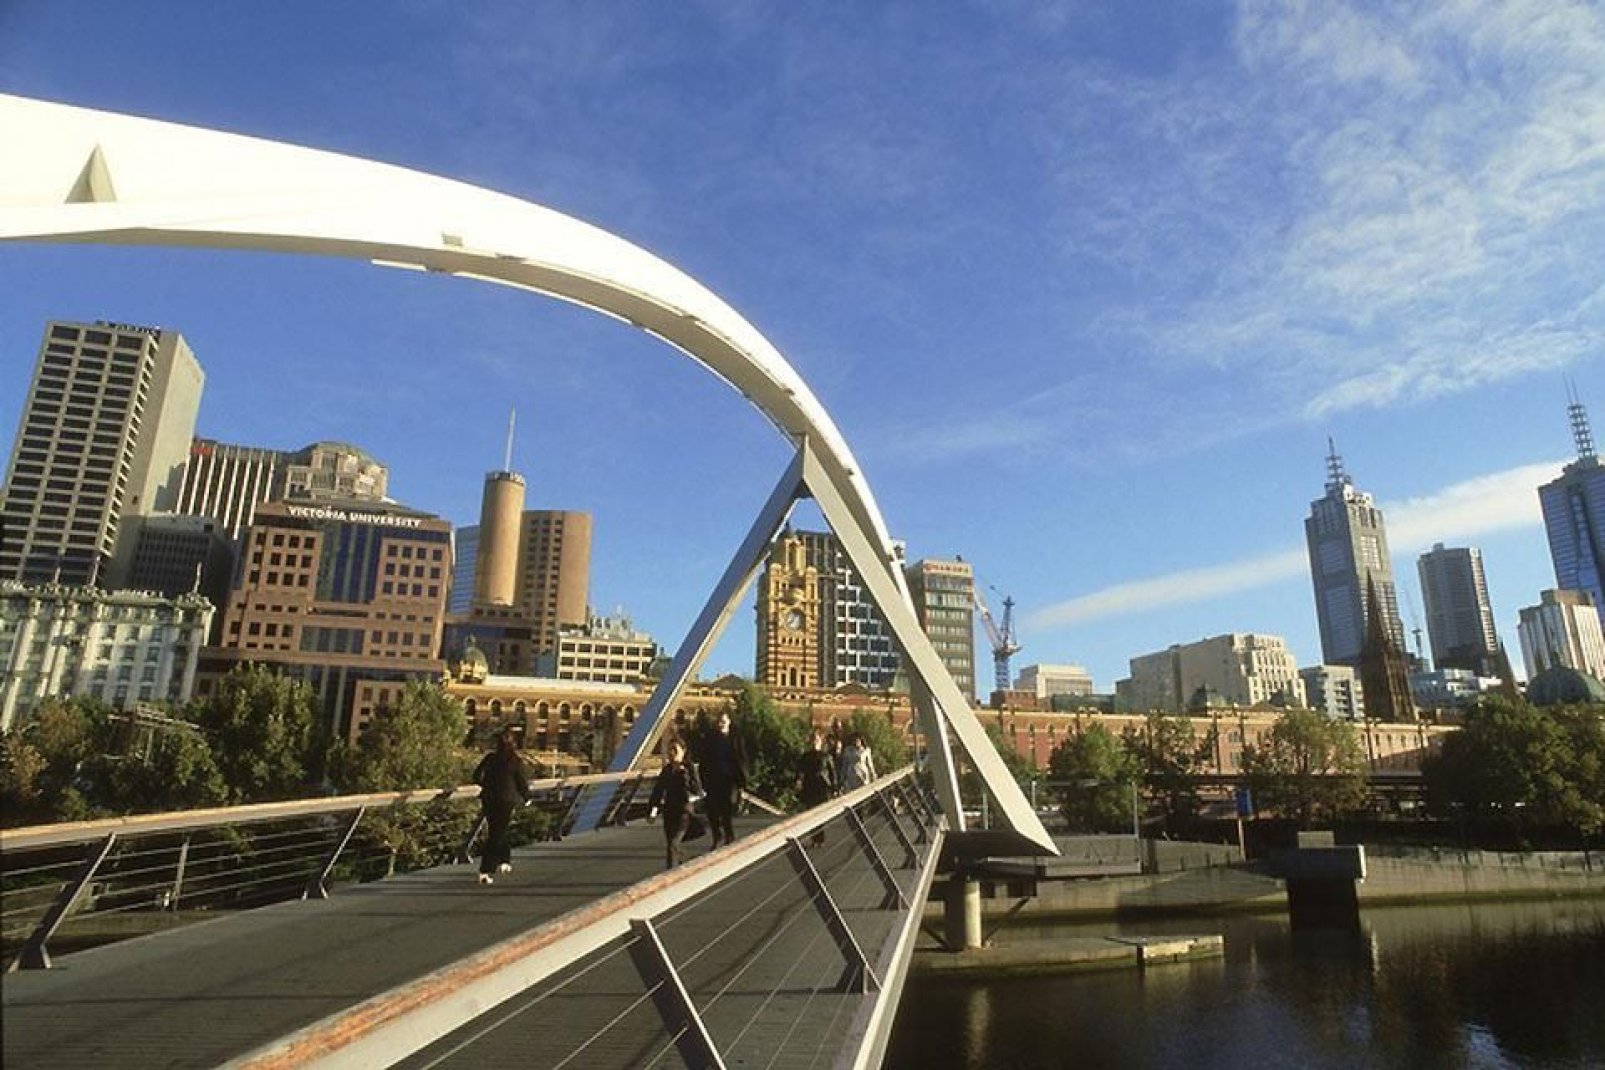 The Yarra river cuts across the city of Melbourne.